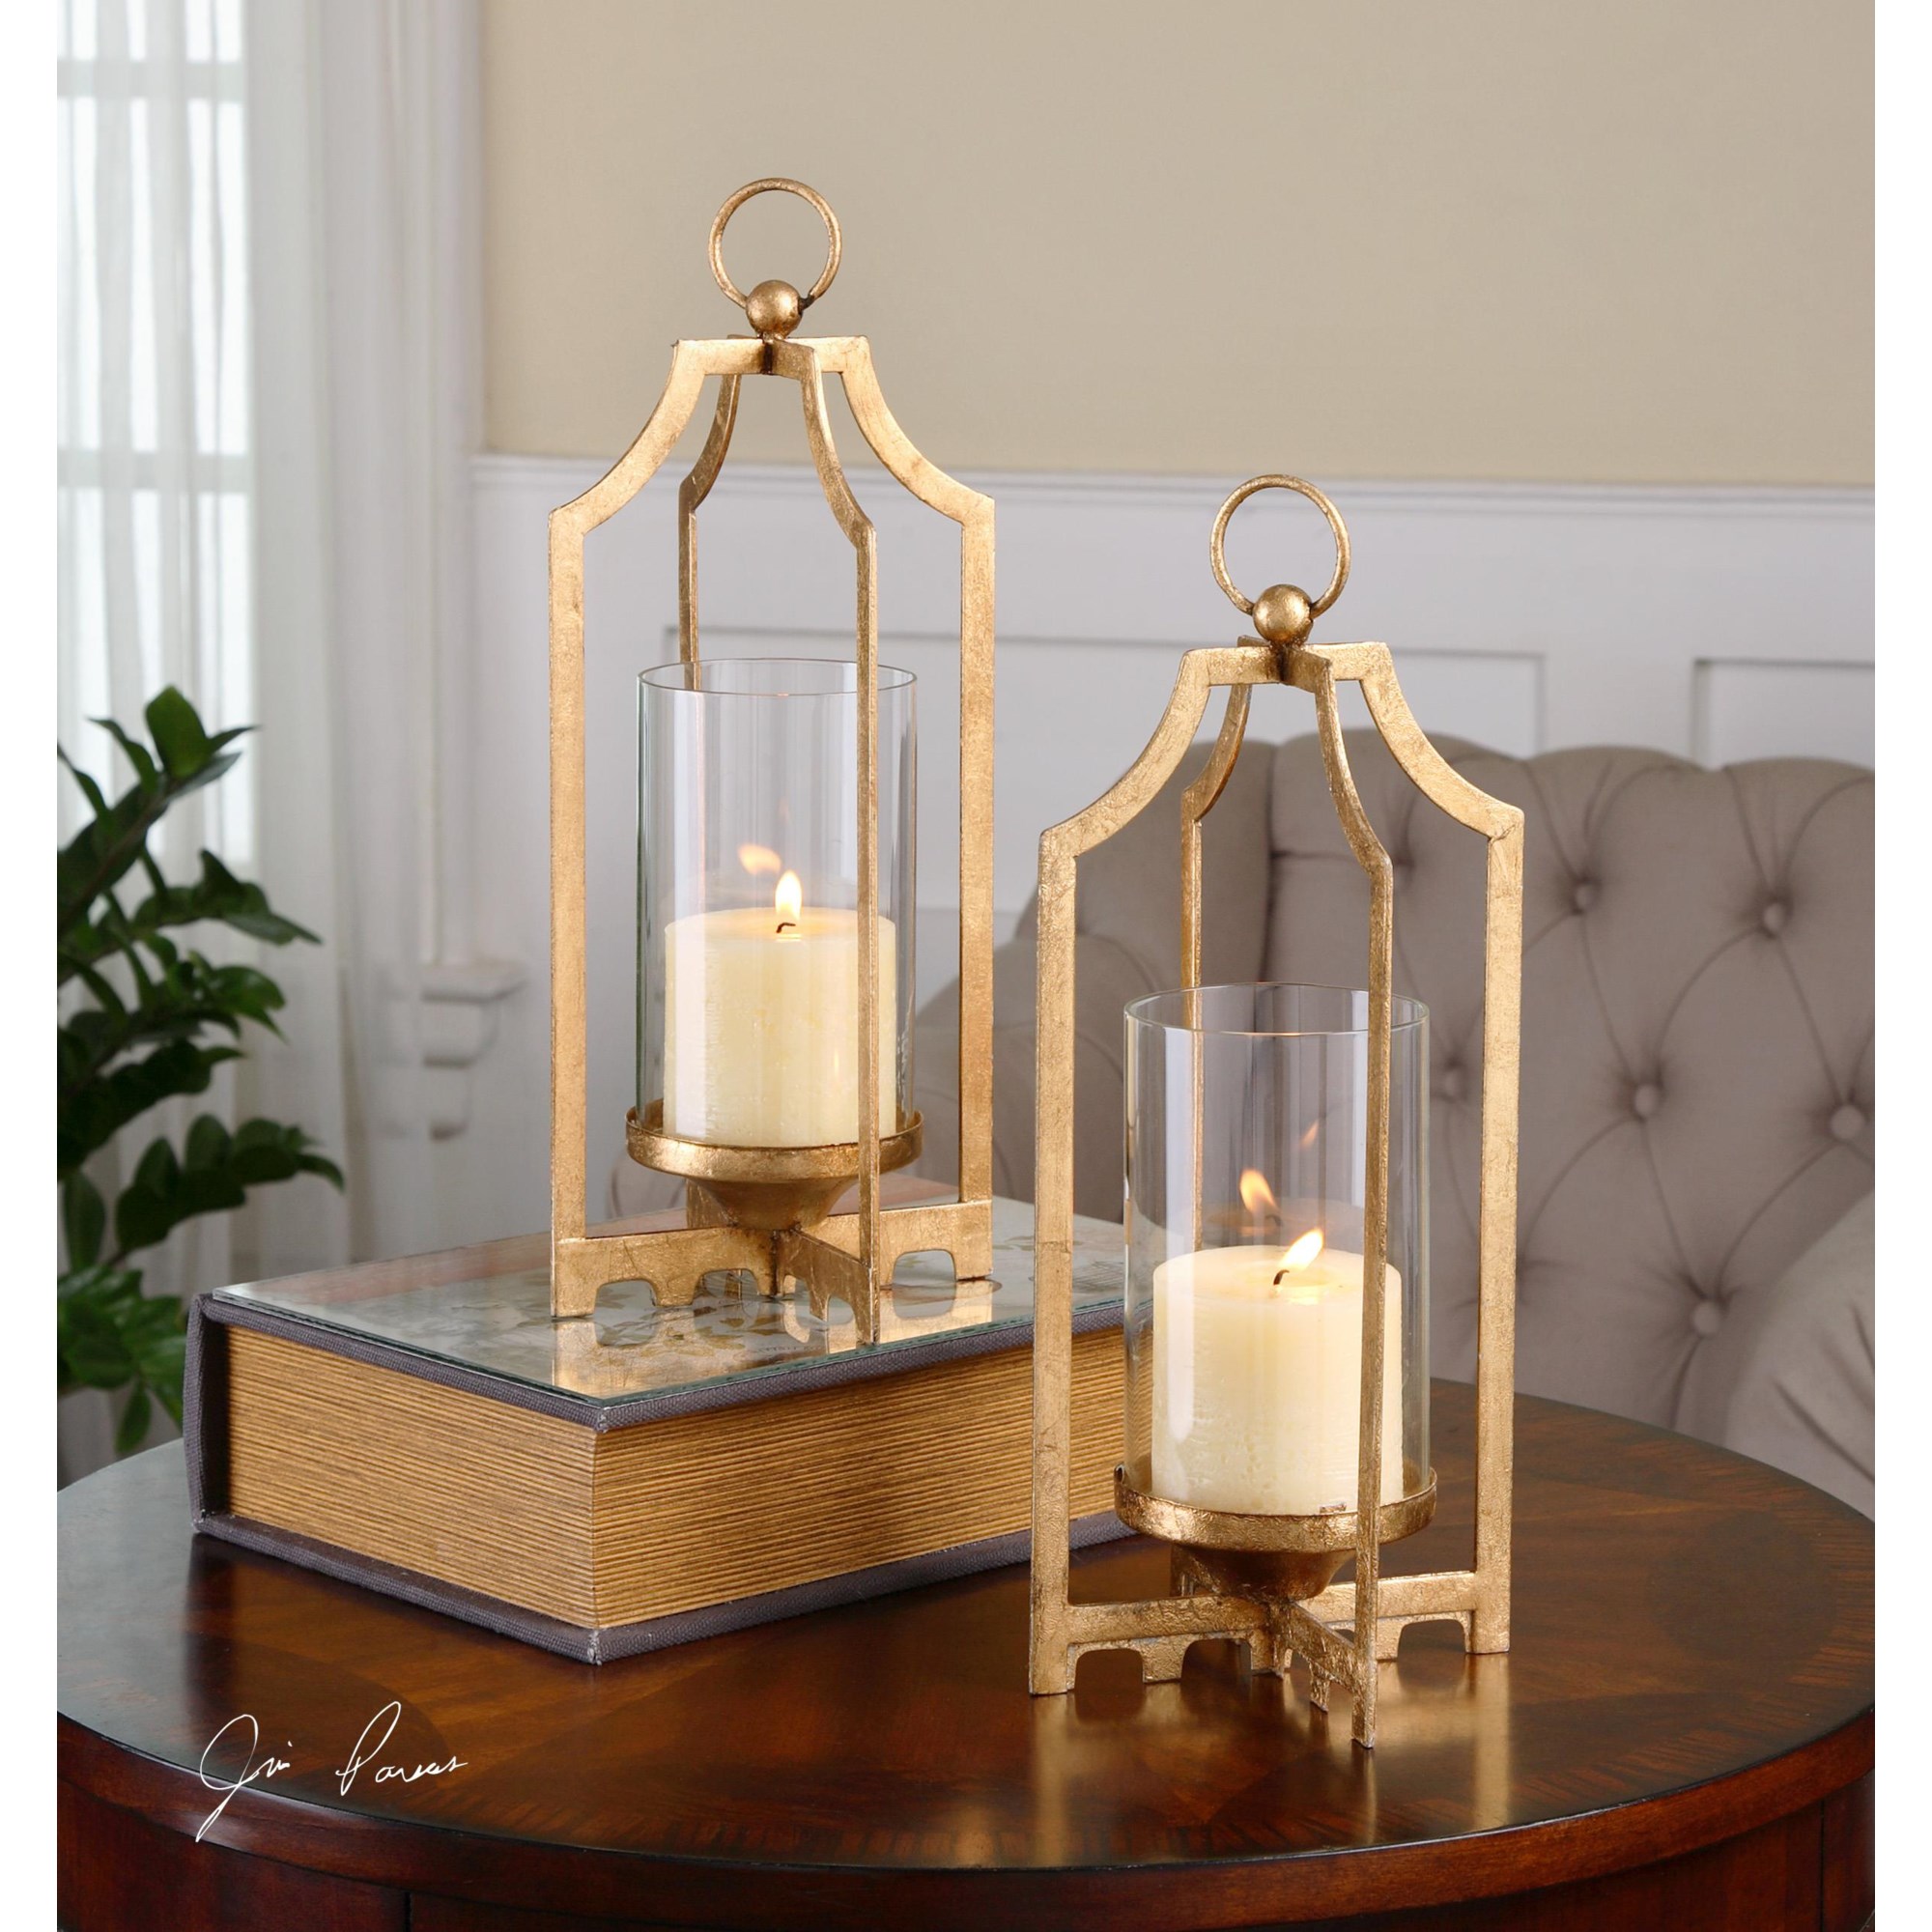 Holders Candleholders - & Gold Holders S/2 19957 Candle Accessories | Uttermost Mattress - | Furniture Wayside Lucy Accessories Candle